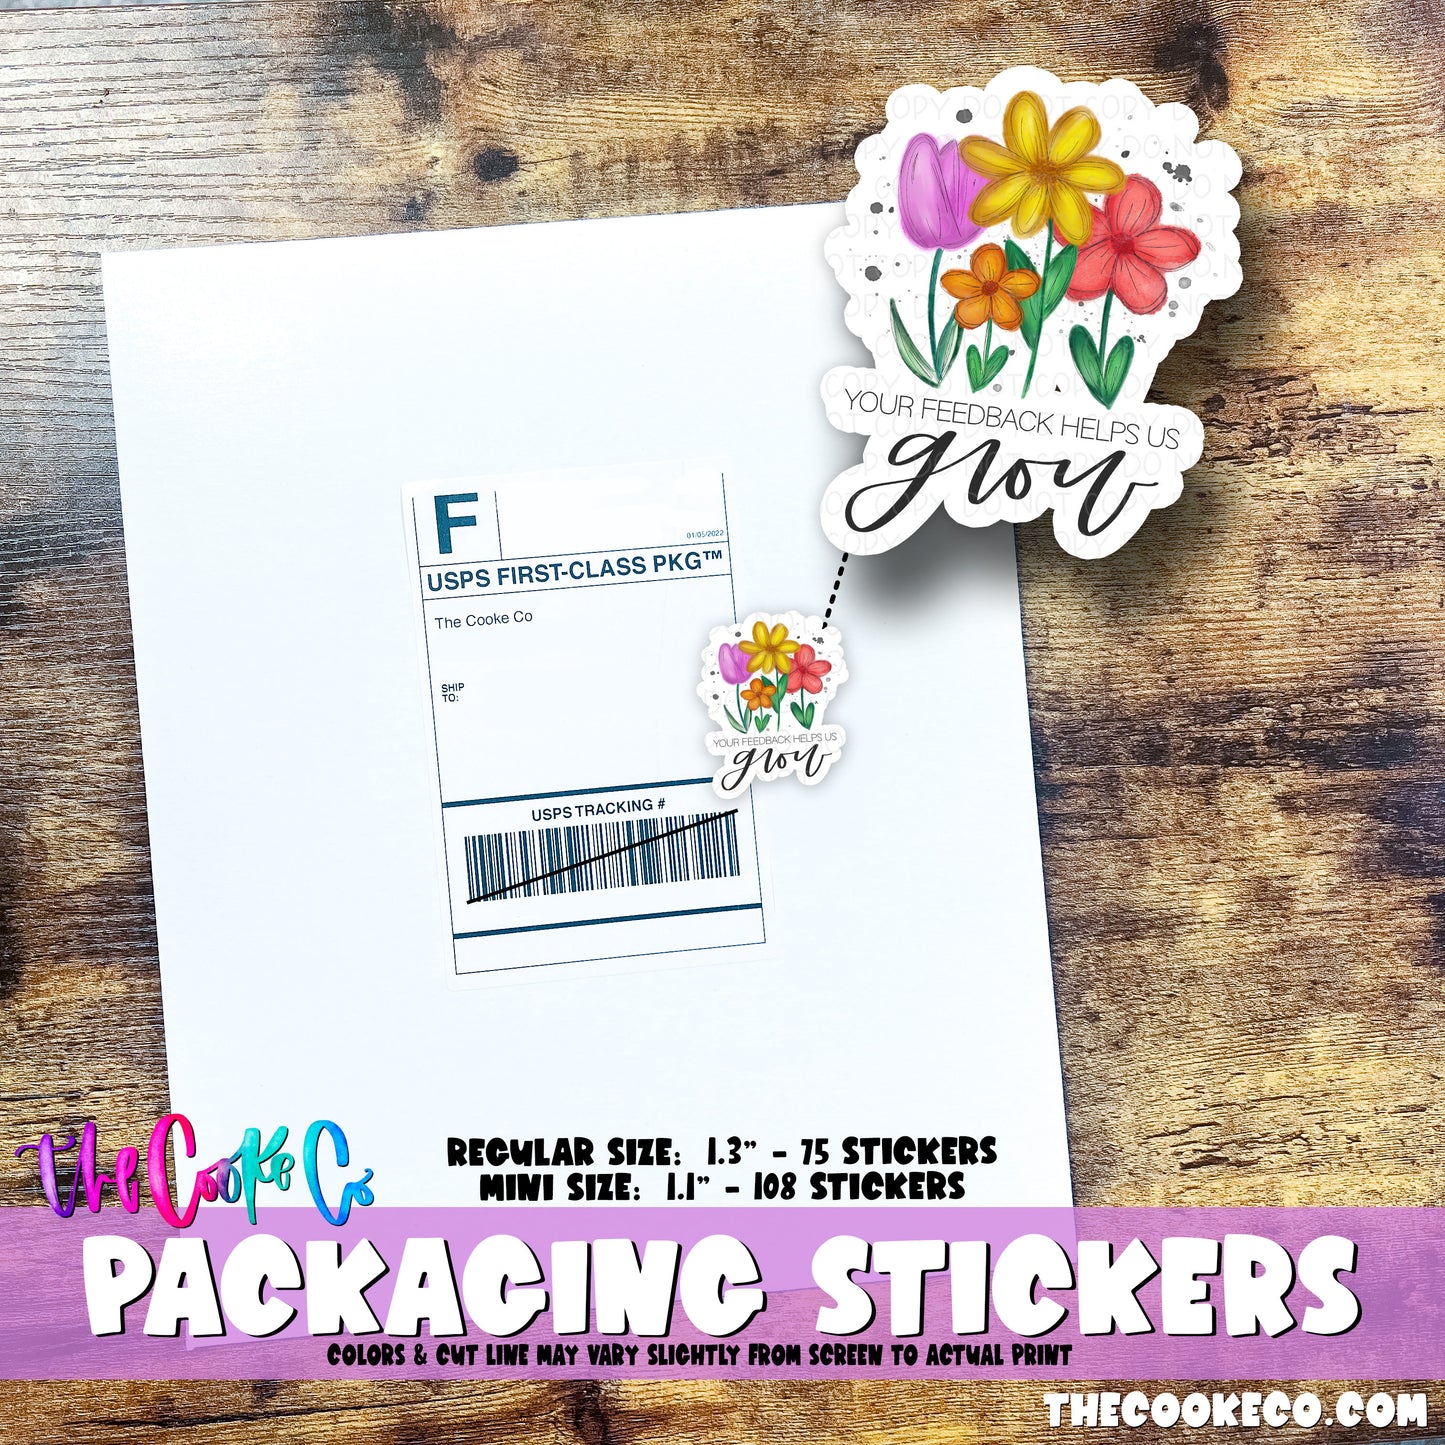 PTO Packaging Stickers | #C0795 - YOUR FEEDBACK HELPS US GROW